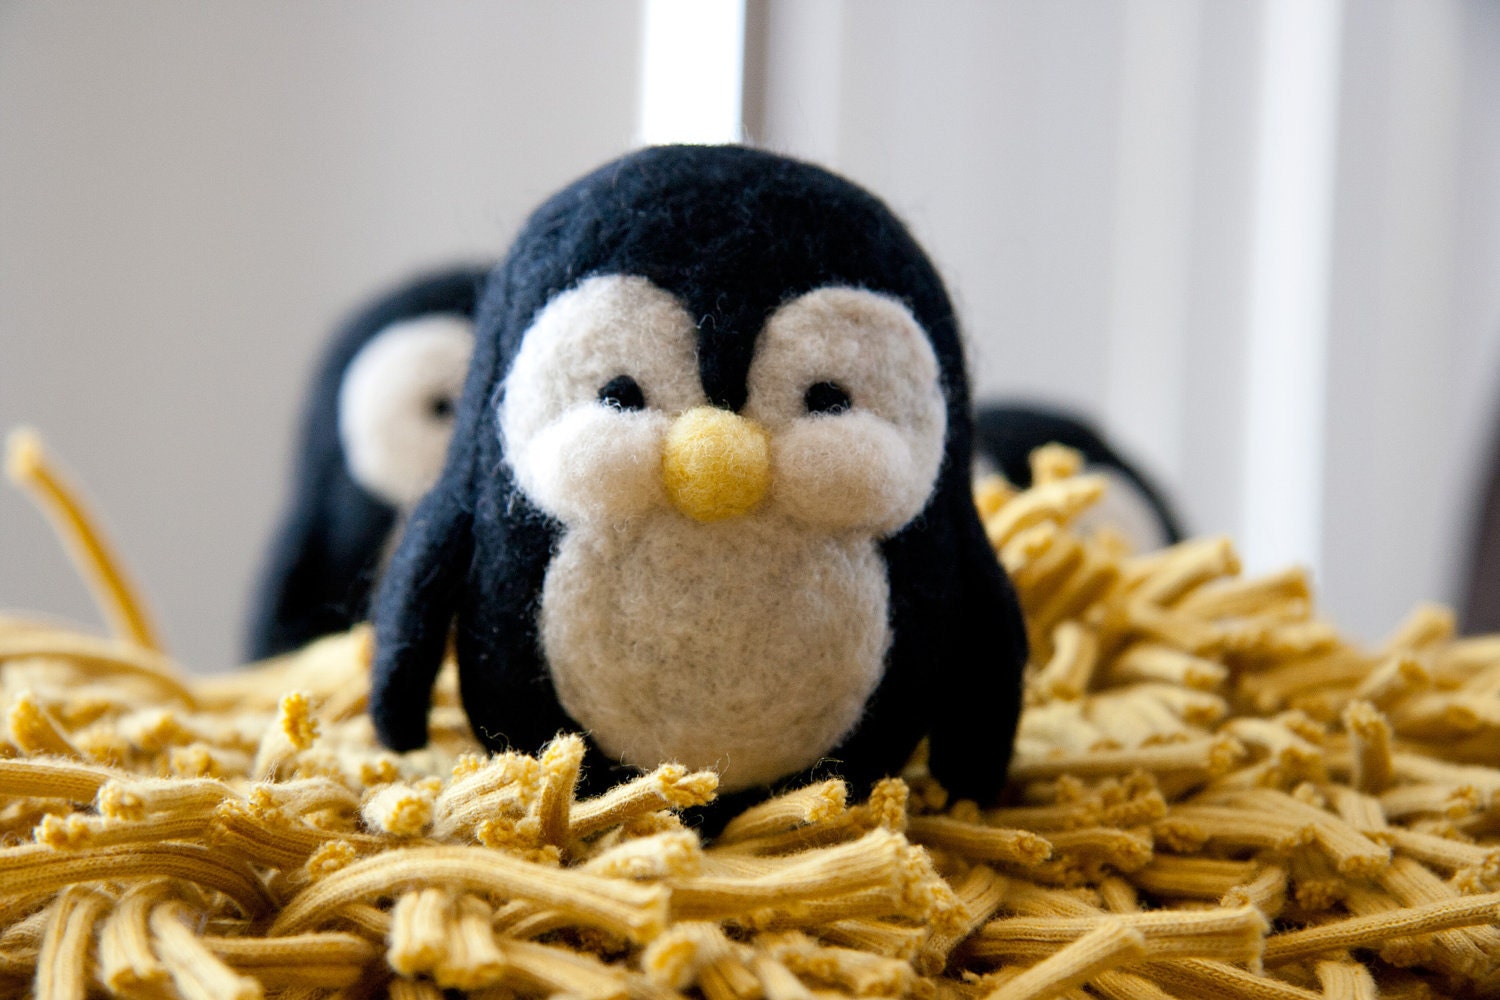 Gus, the needle felted penguin